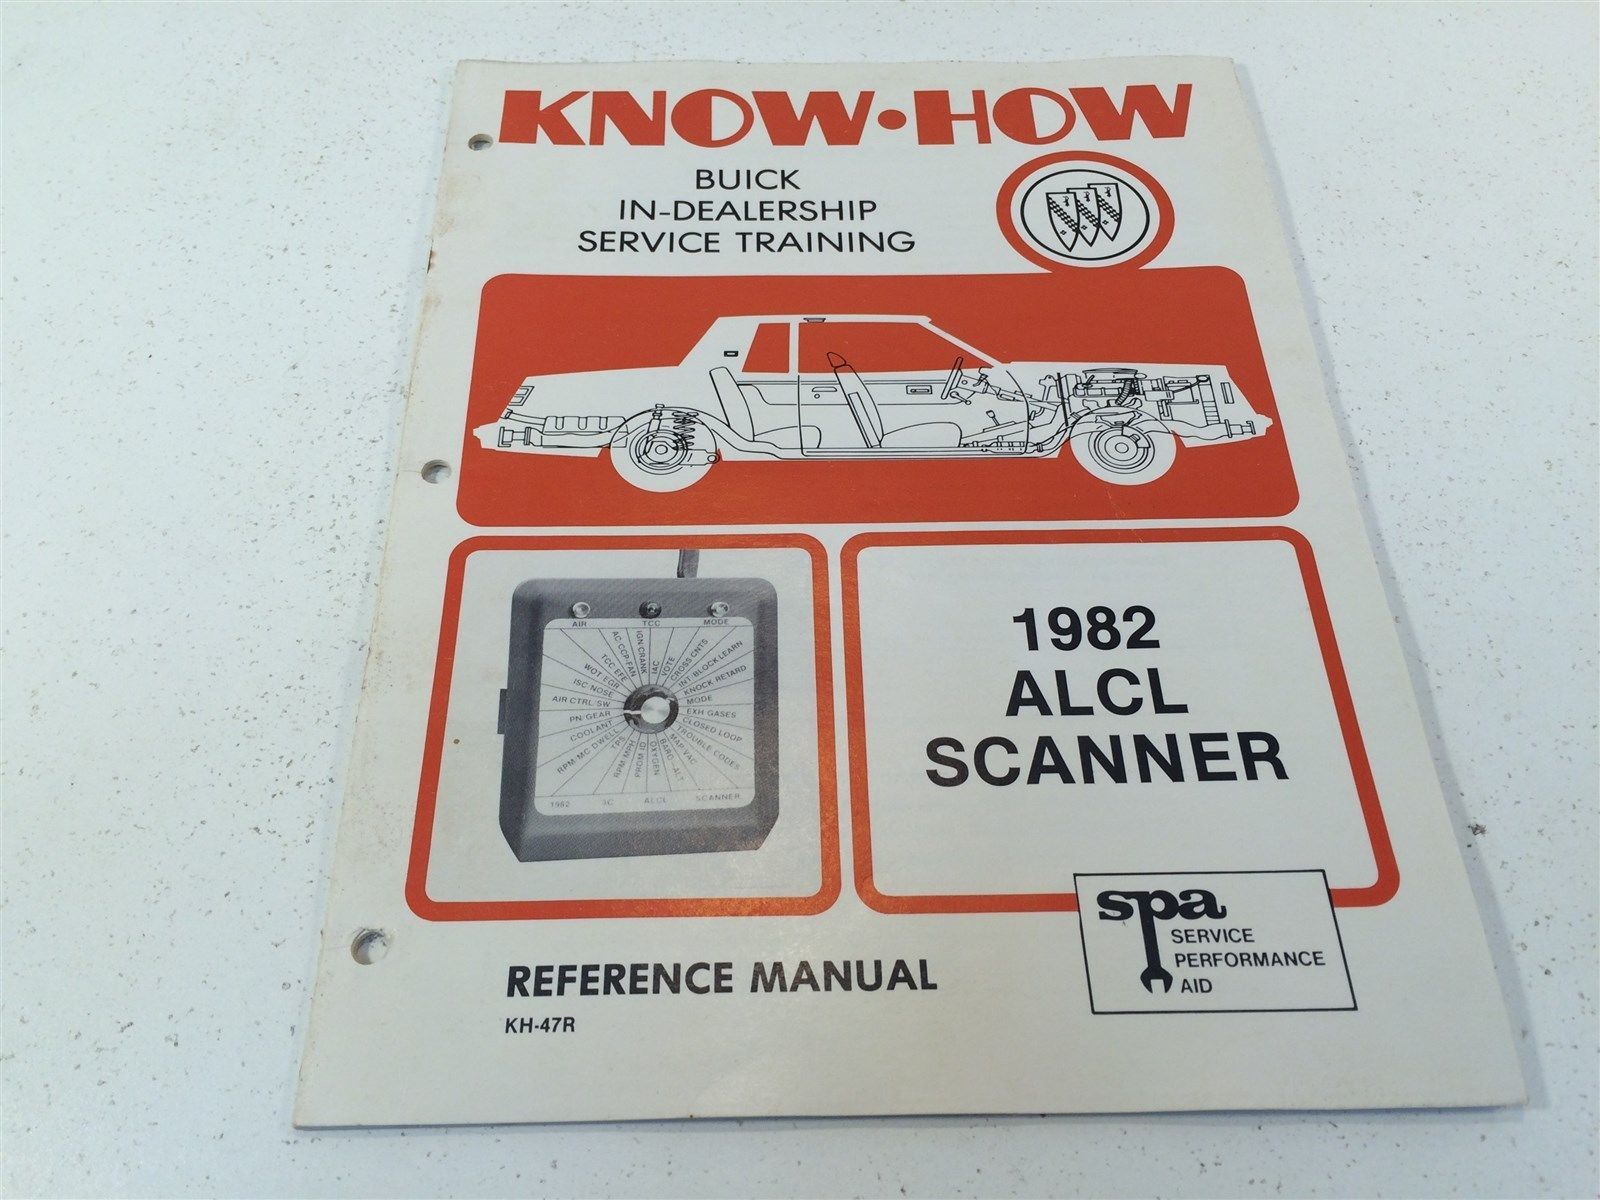 1982 Buick Know How ALCL Scanner KH-47R Reference Manual KH47R - $14.99